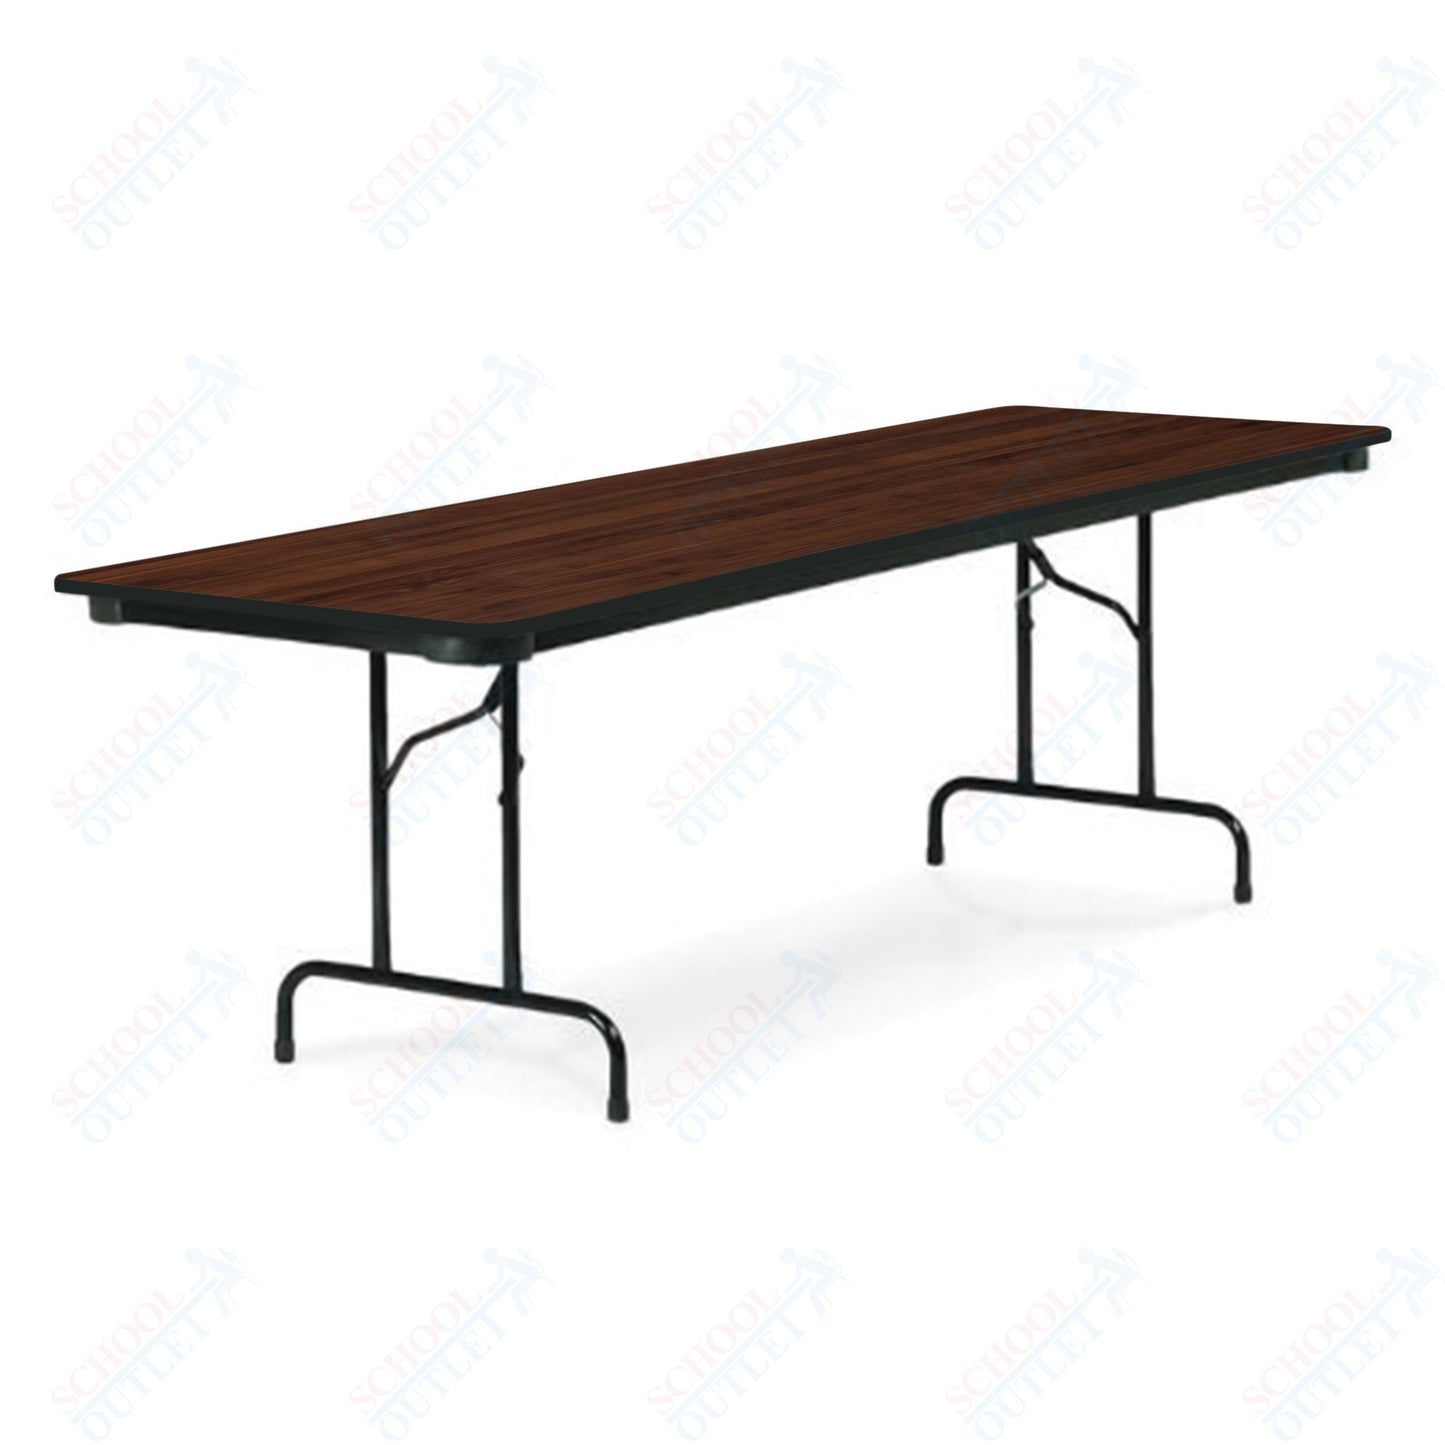 Virco 602448 - 6000 series 3/4" thick particle board folding table 24" x 48"